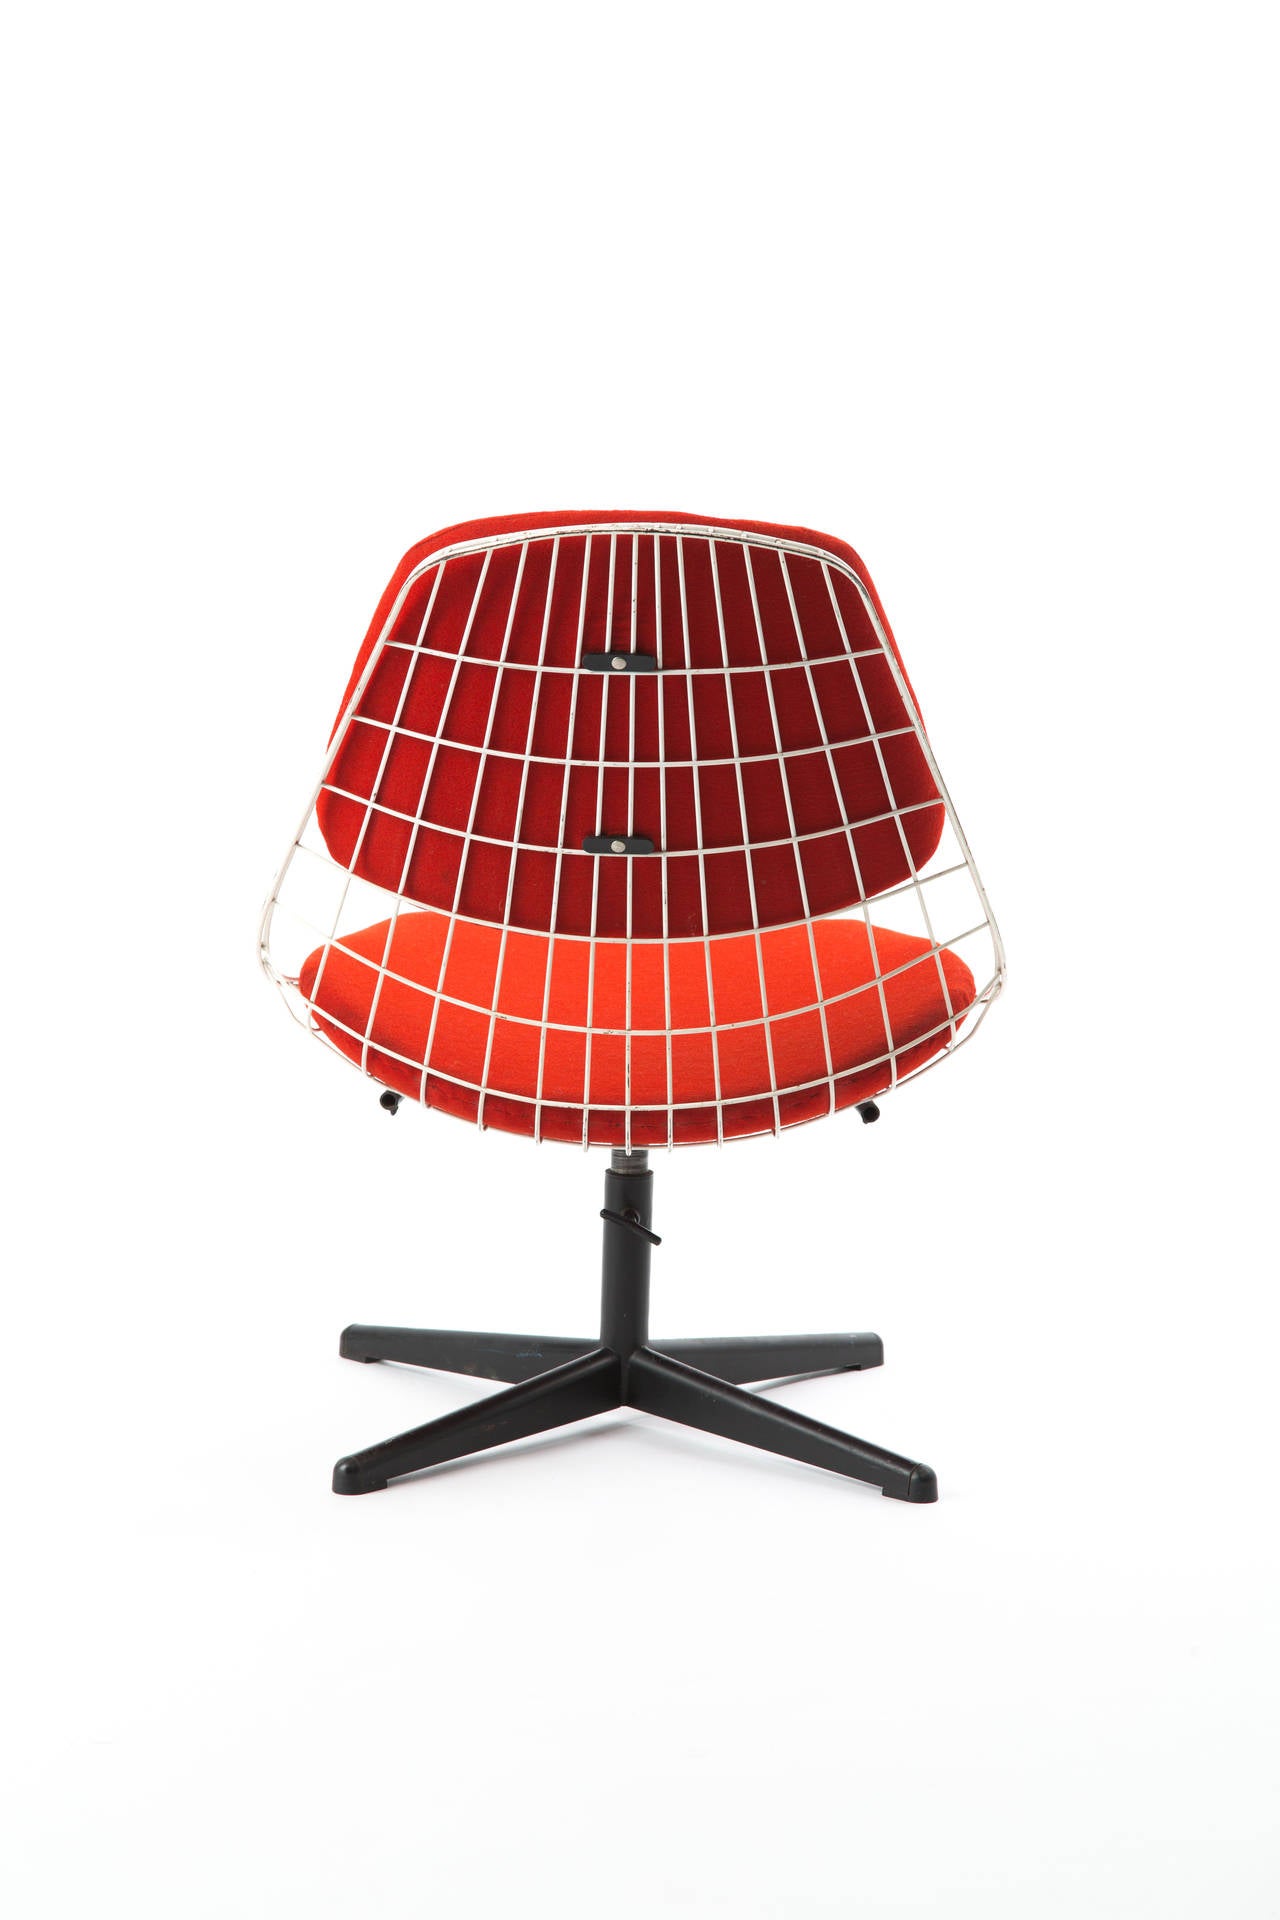 Cees Braakman for Pastoe. Frame and shell from bent welded and epoxy coated steel rods. Seat and backrests with loose cotton cushions. The base is of black painted metal. The chair can be put in different sitting heights by using a screw in the